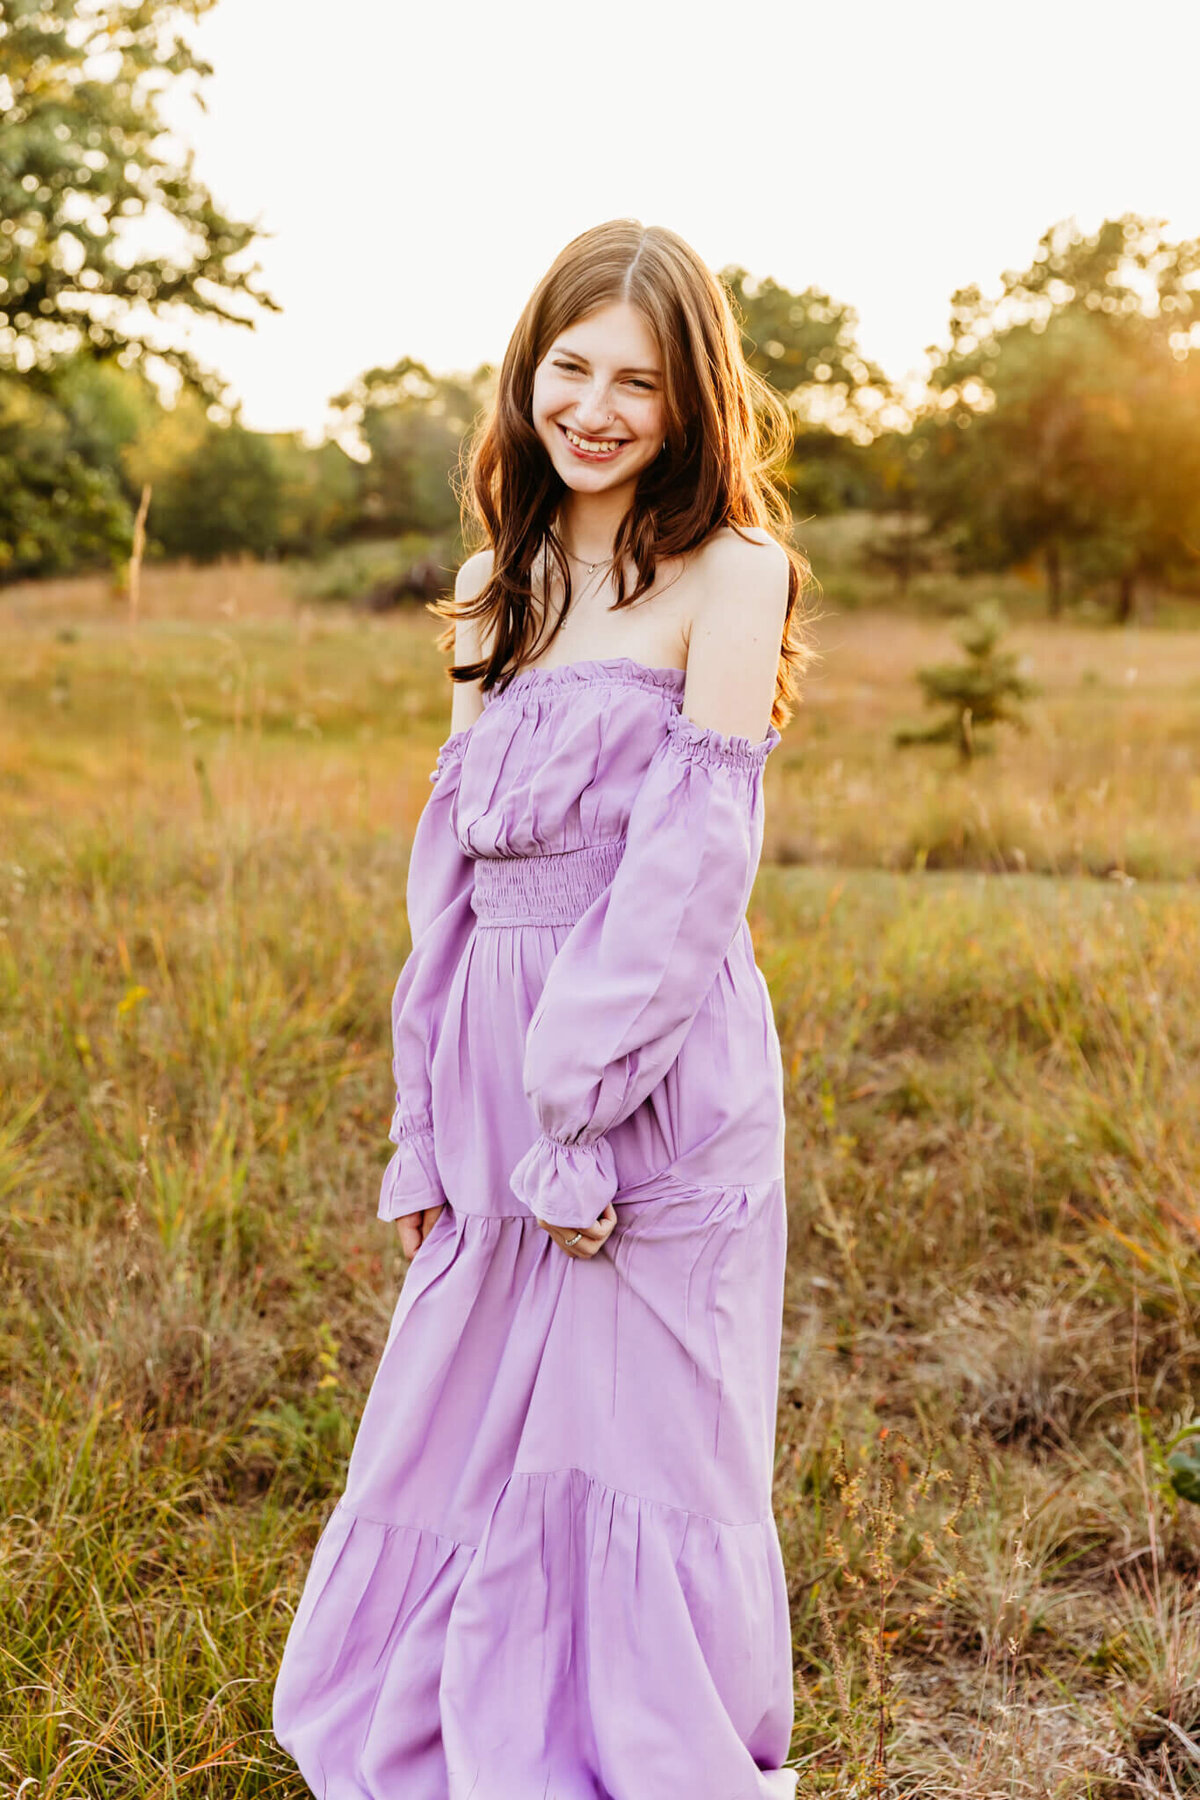 teen girl in a purple dress smiling while holding dress in a field near Appleton WI